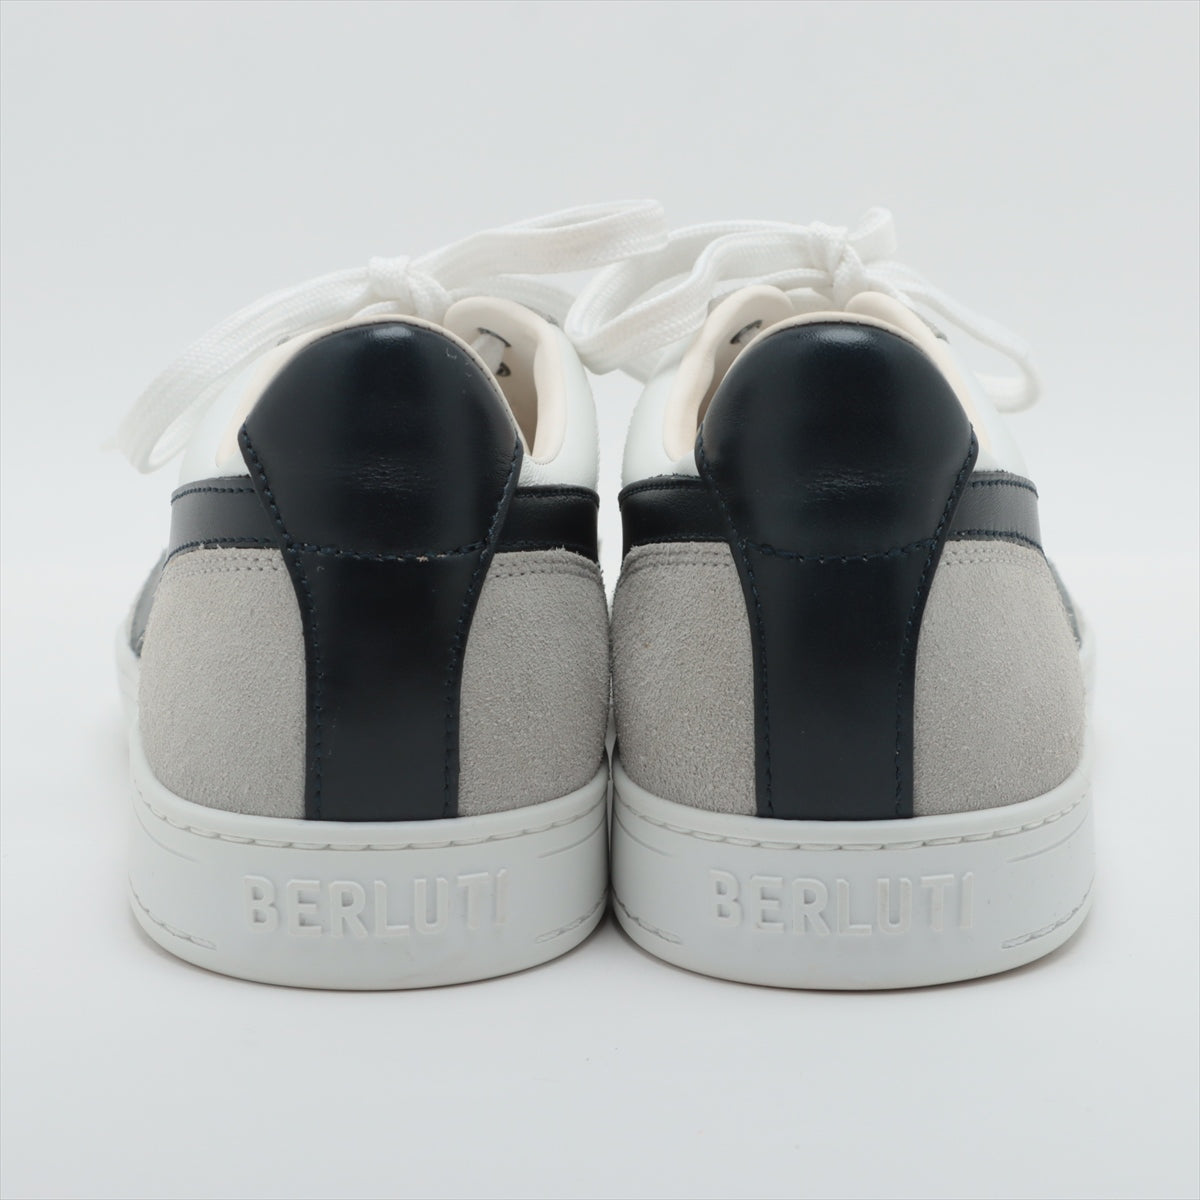 Berluti playtime Leather & Suede Sneakers 8.5 Men's Gray x white Calligraphy box There is a storage bag